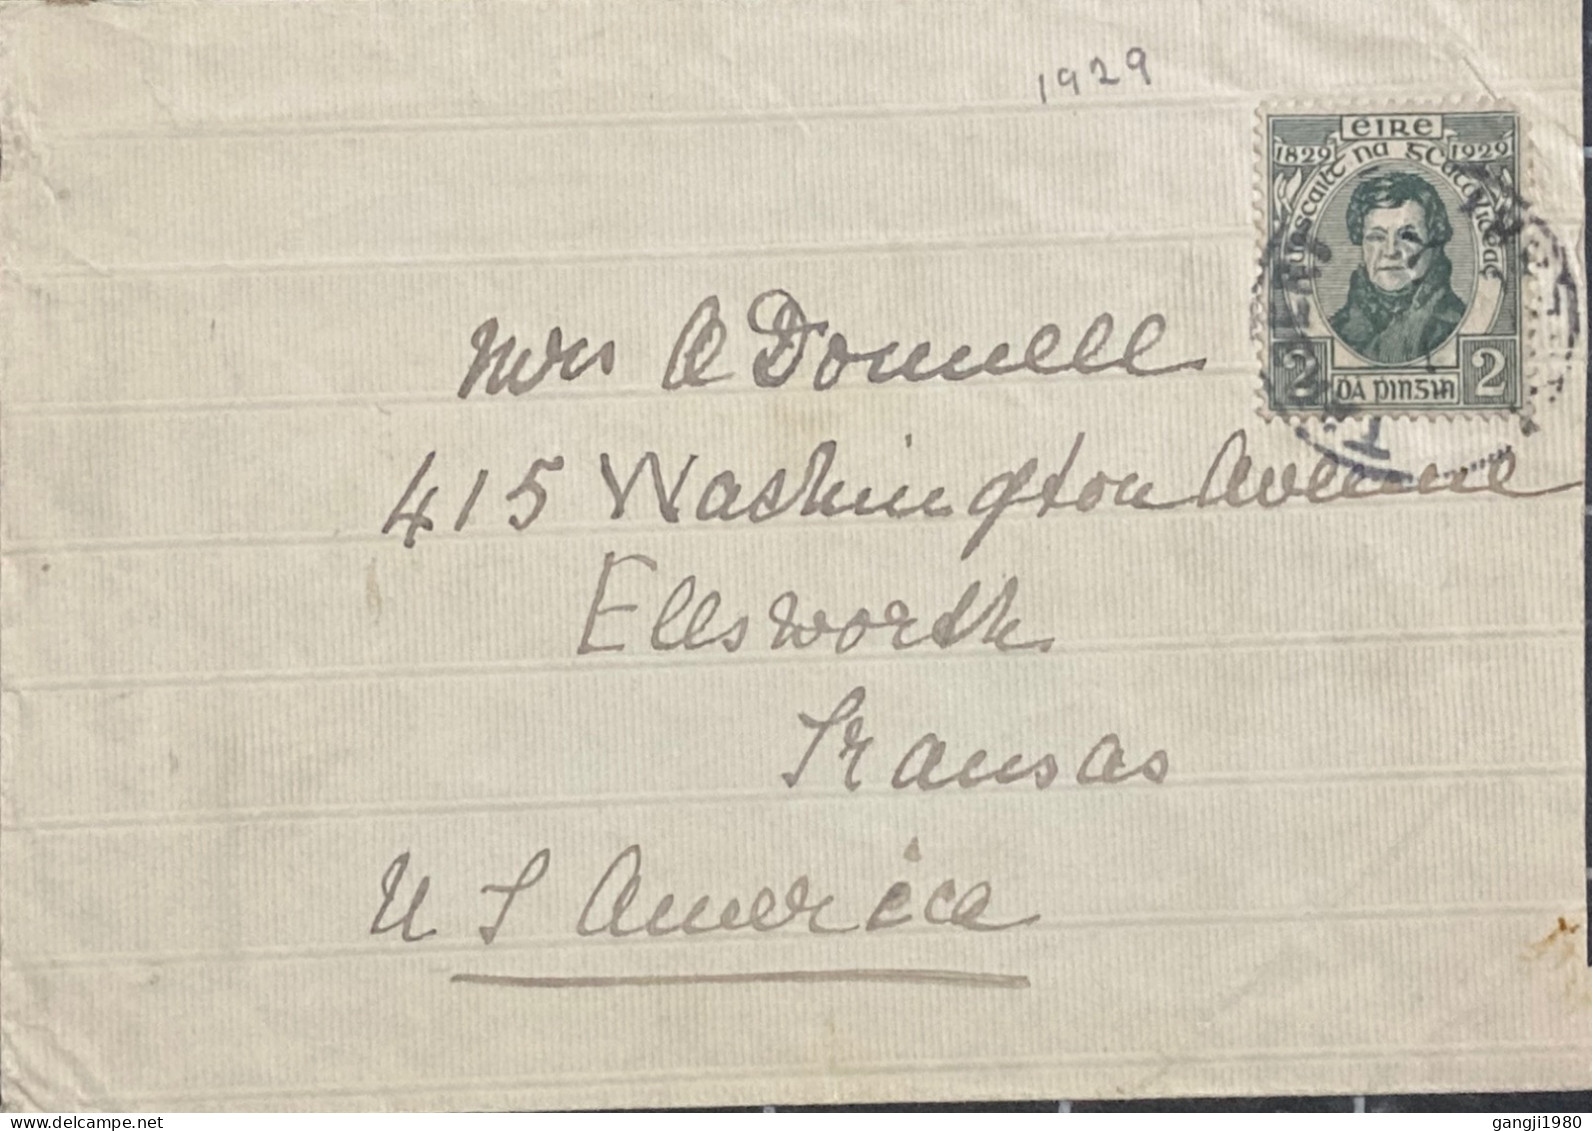 IRELAND 1929, COVER USED TO USA,  DANIEL O CONNELL STAMP, TARBERT TOWN CANCEL. - Lettres & Documents